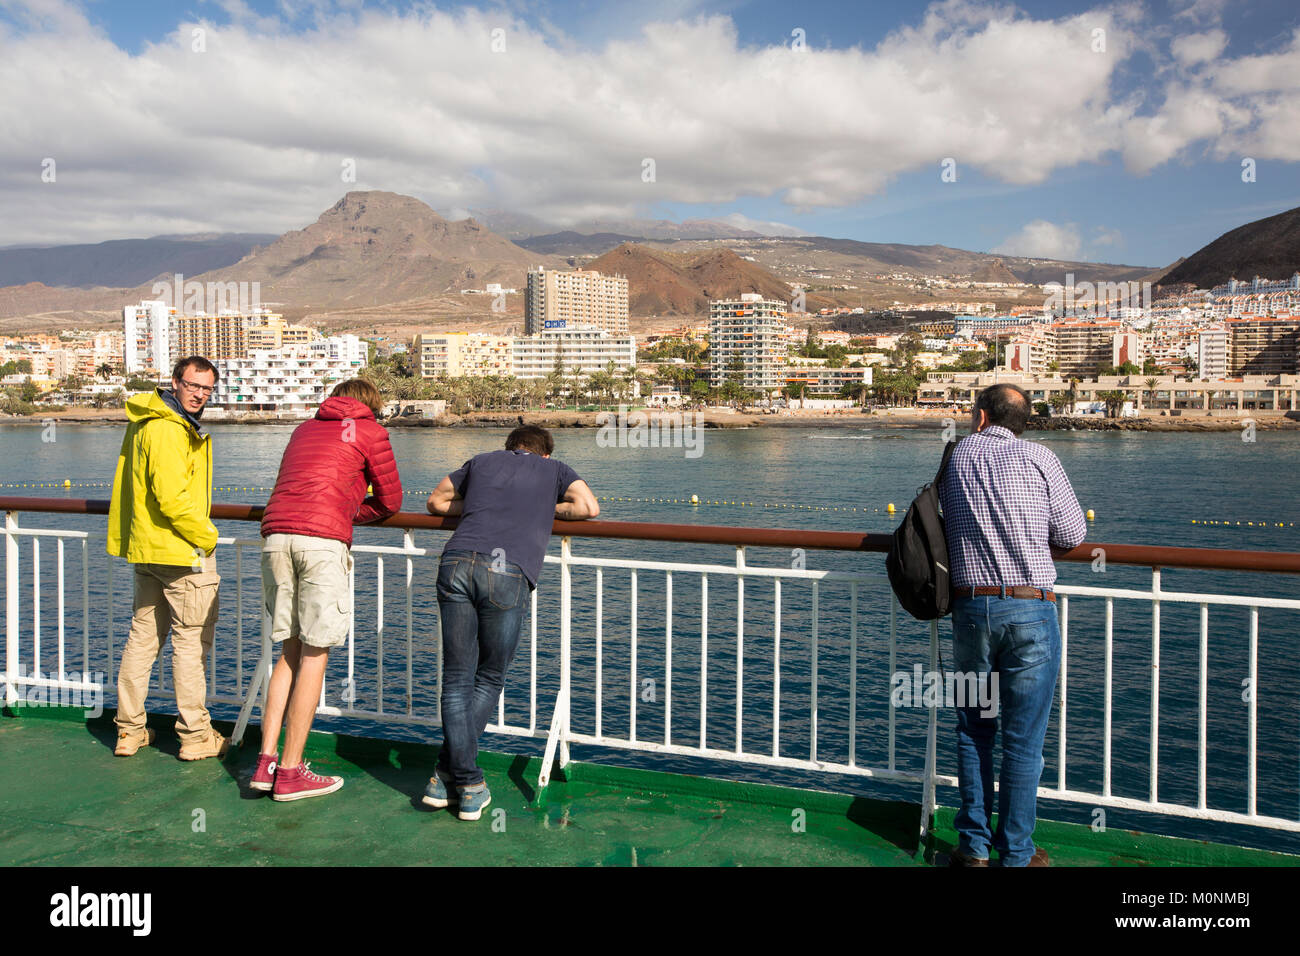 Passengers on a ferry coming into Los Christianos on Tenerife, Canary Islands. Stock Photo